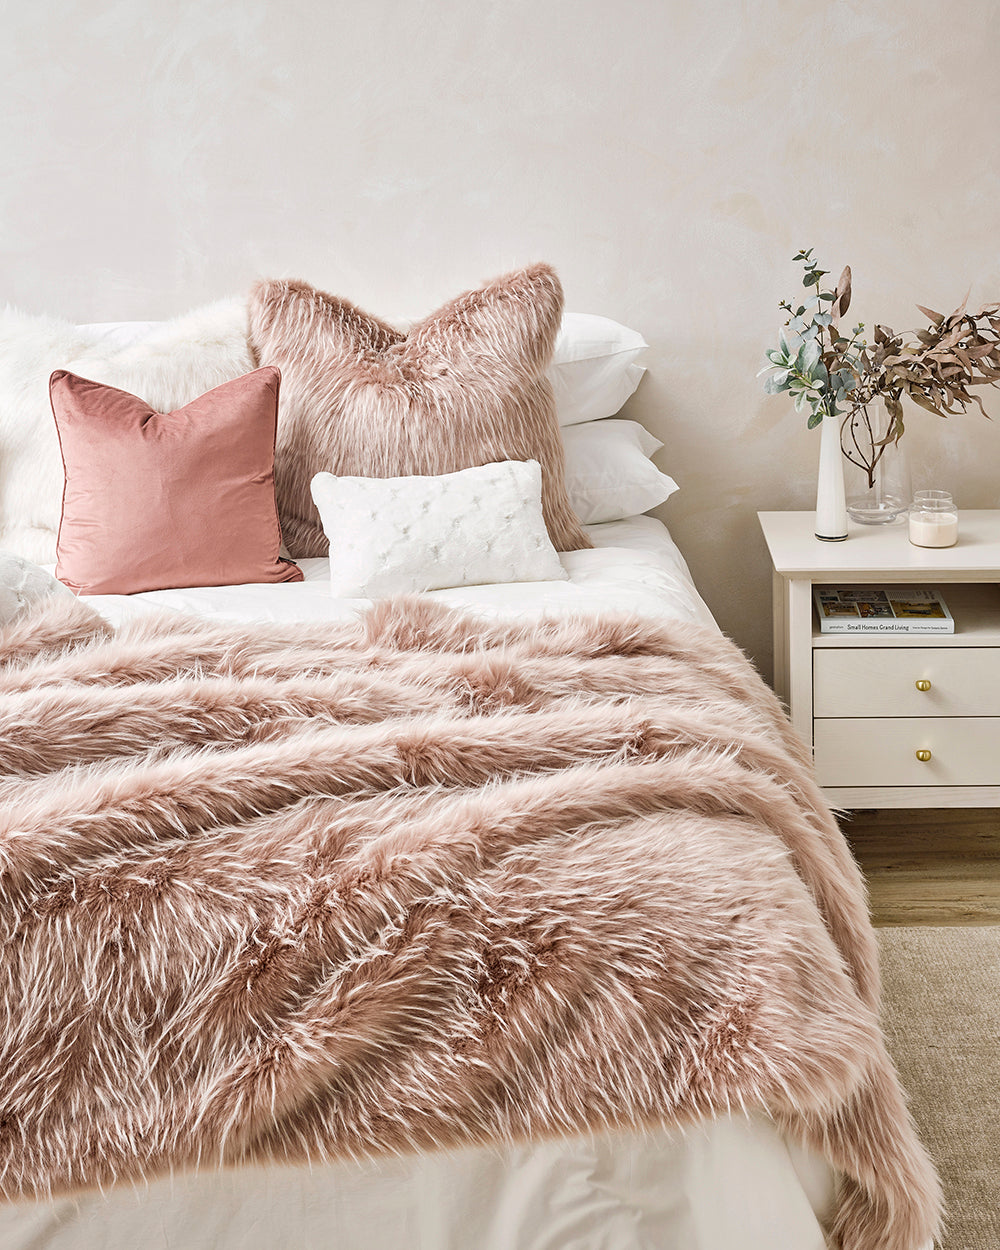 Heirloom Peony Plume Cushions in Faux Fur are available from Make Your House A Home Premium Stockist. Furniture Store Bendigo, Victoria. Australia Wide Delivery. Furtex Baya.